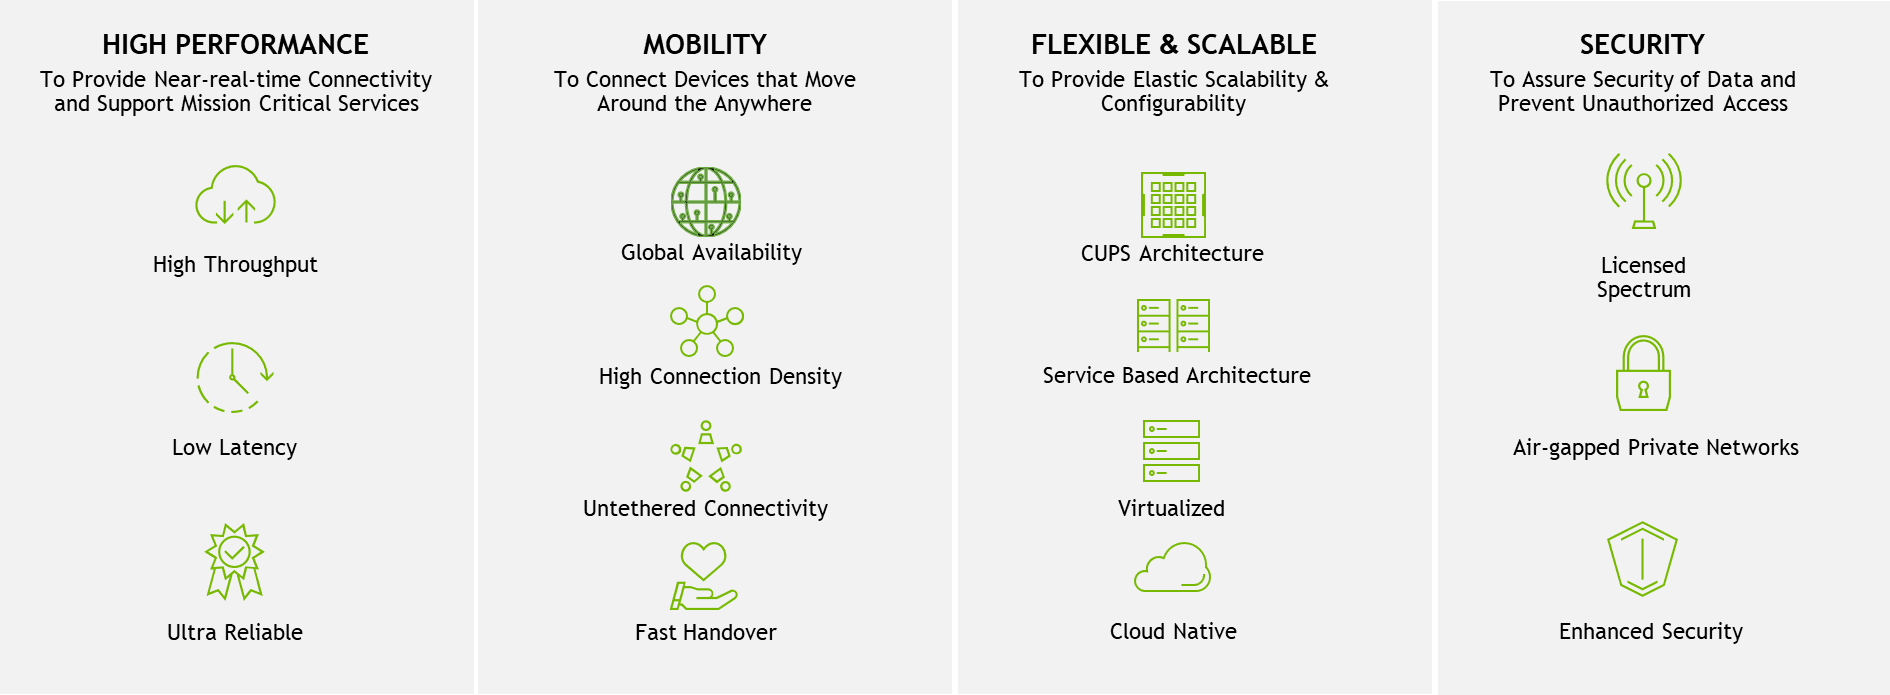 Graphic with icons illustrating 5G performance, mobility, flexibility/scalability, and security.